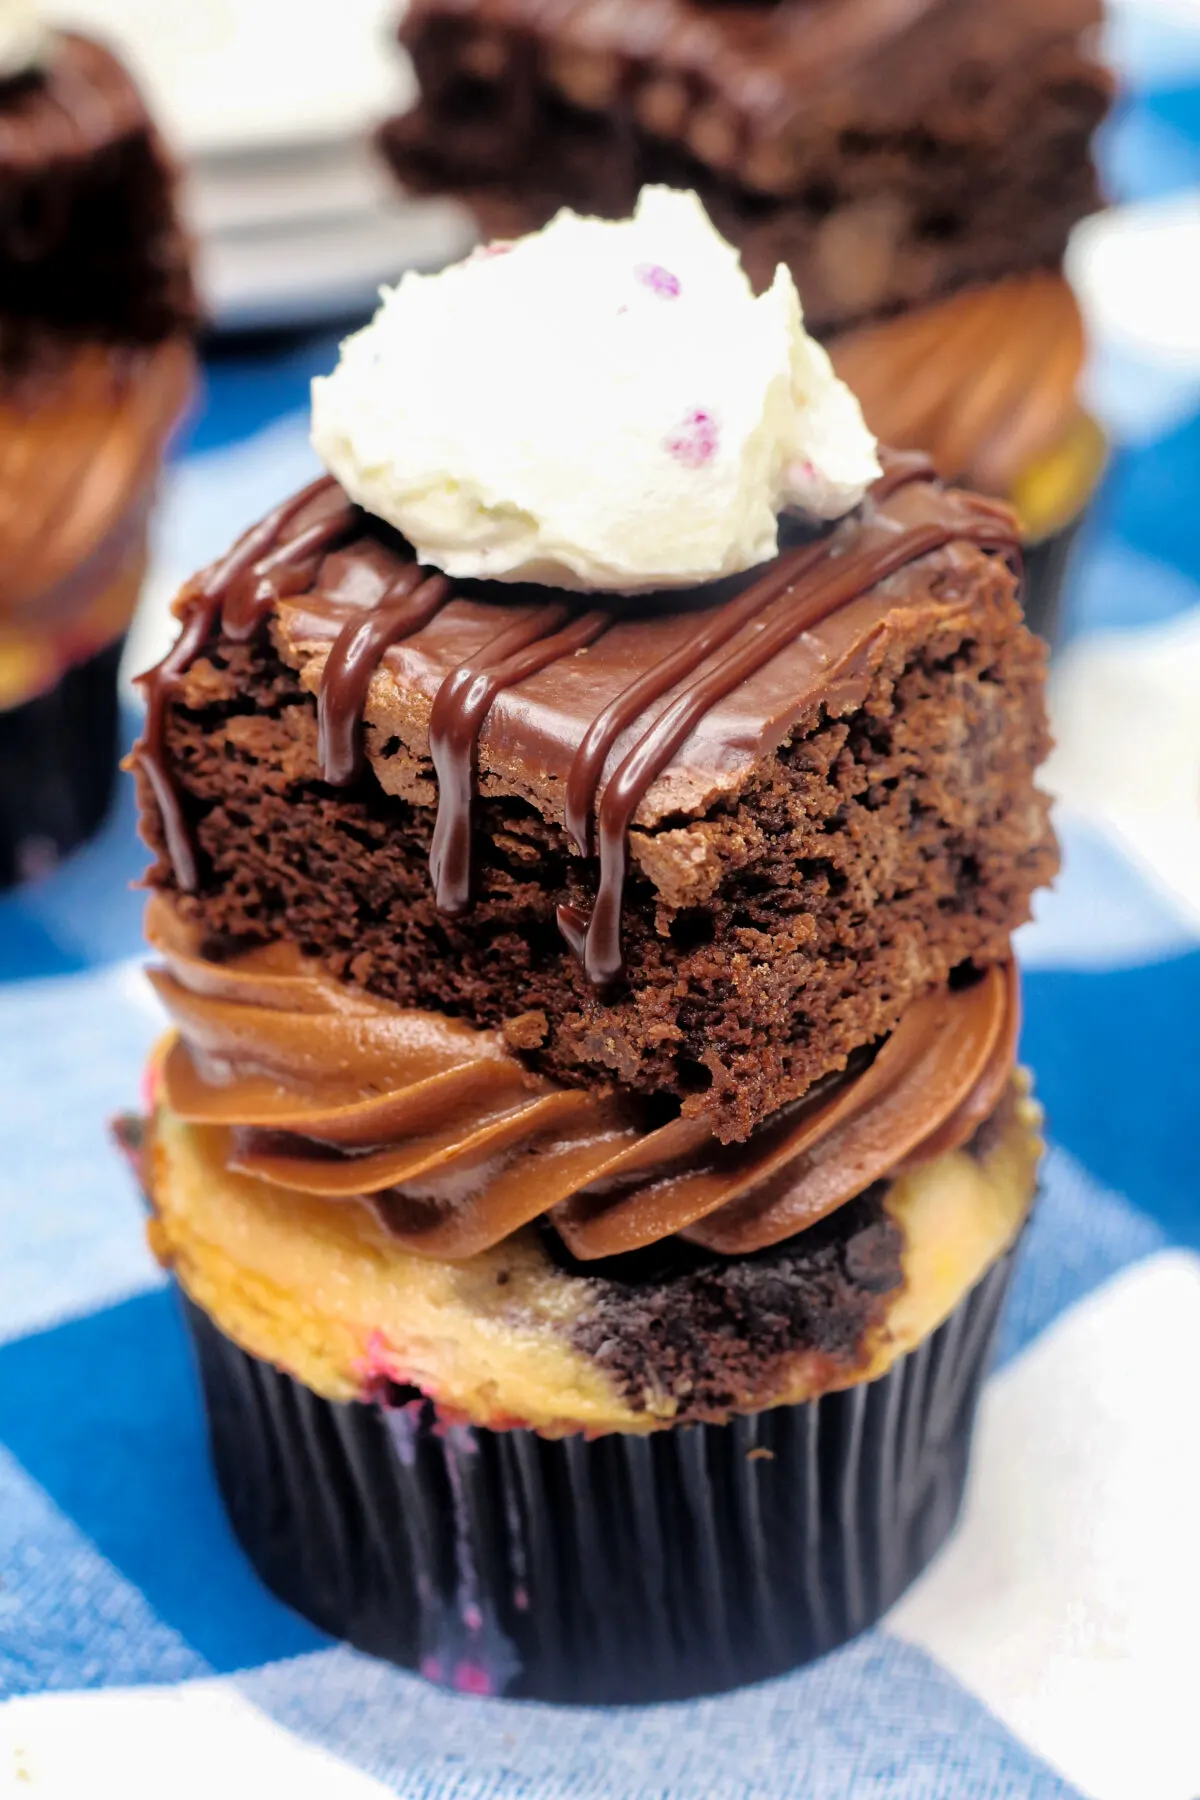 We've taken two of our favorite desserts, cupcakes and brownies, and combined them into one amazing treat! Easy to make with box mixes!